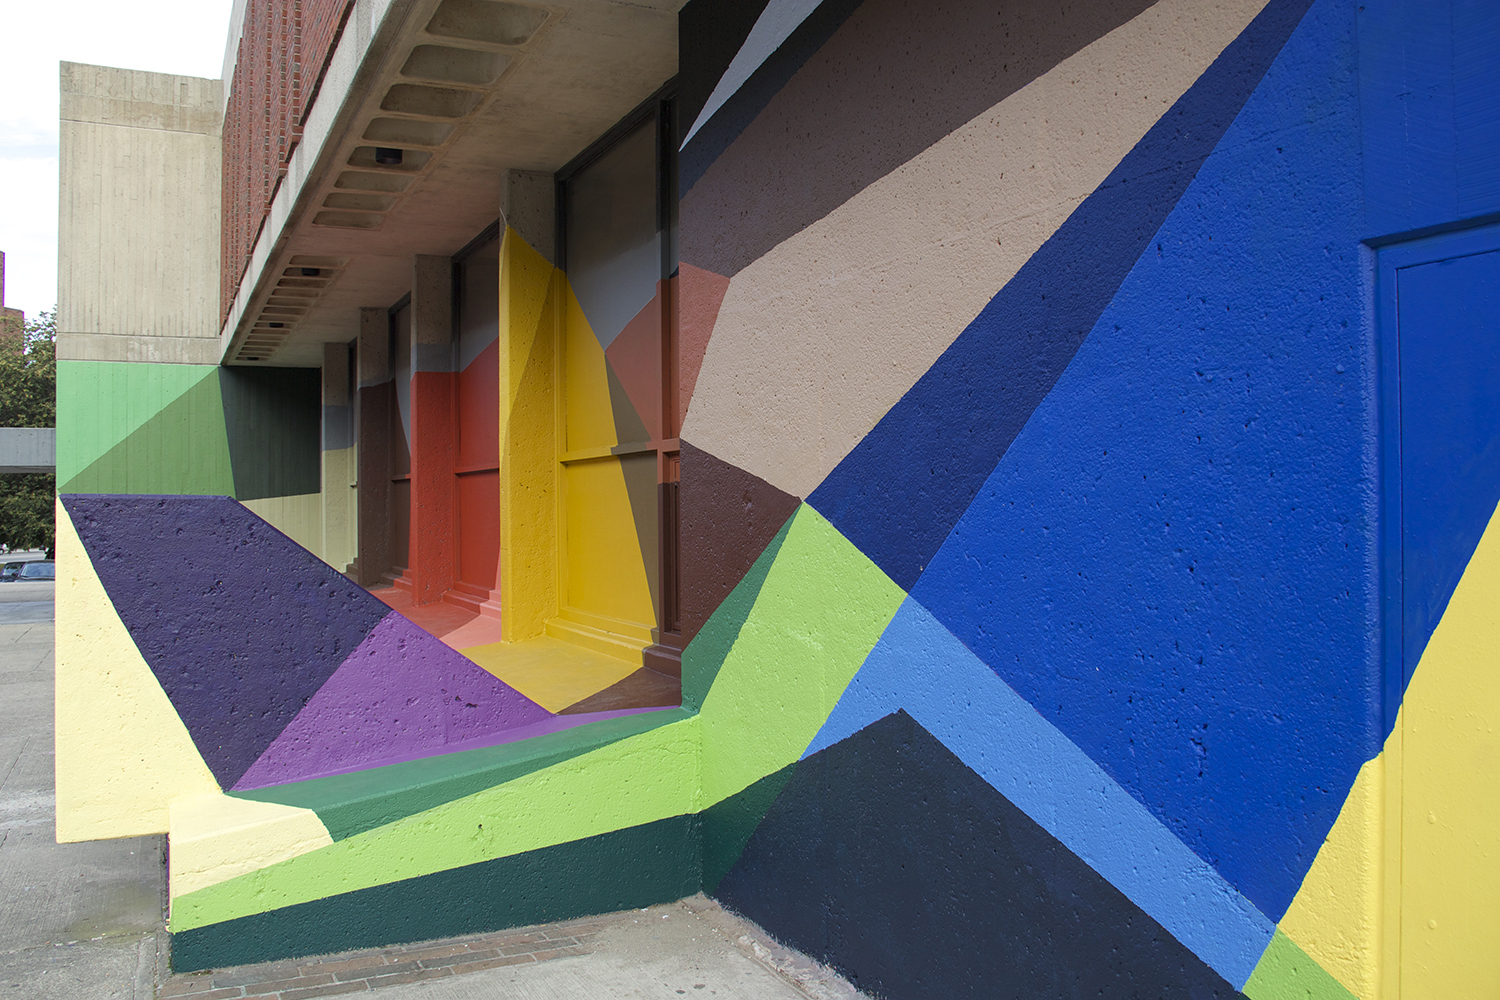    Razzle Dazzle ,   2015, Classical High School, Providence RI,  latex paint on exterior wall, curated by  The Avenue Concept    